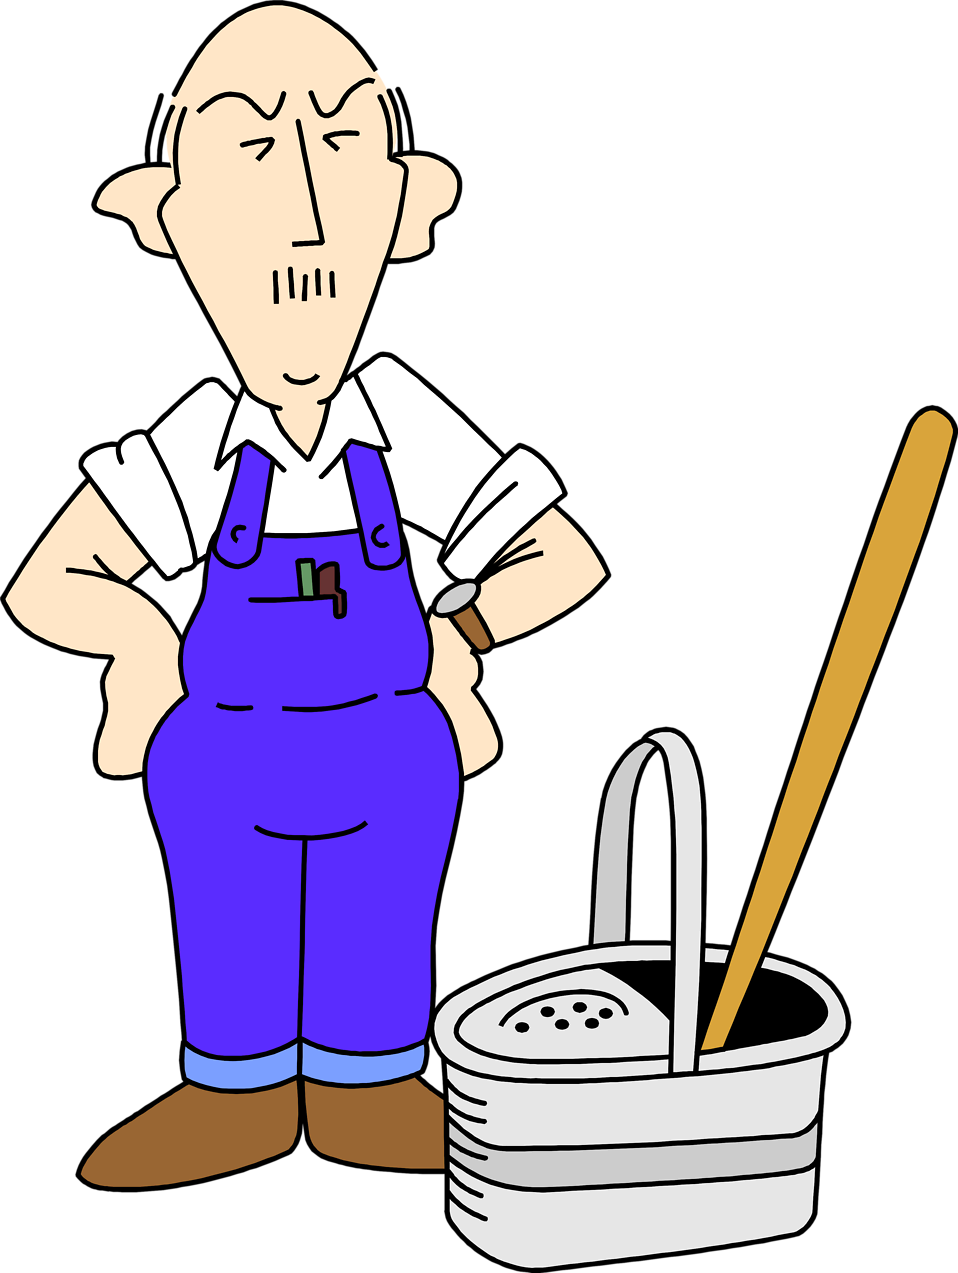 Janitor Clip Art - Blogsbeta - Janitor Clipart